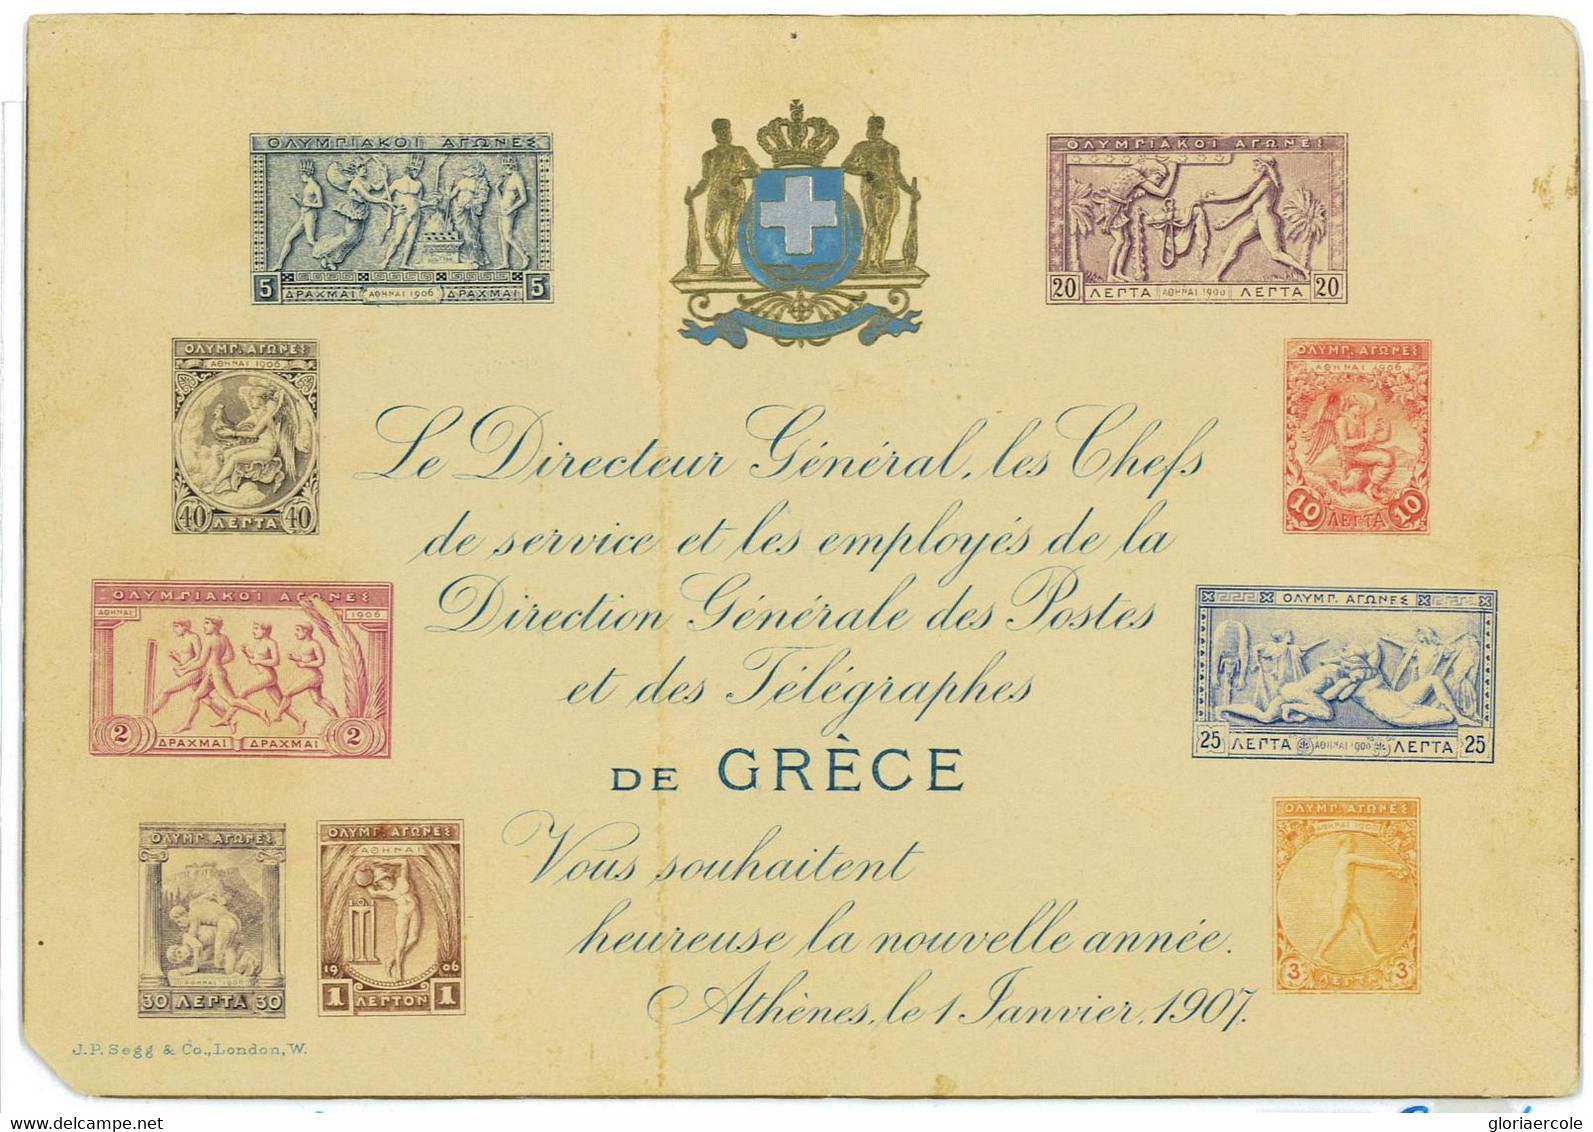 BK1843 - GREECE - POSTAL HISTORY - 1906 Olympic Stamp On OFFICIAL  New Years GREETINGS CARD  1907 - Ete 1896: Athènes